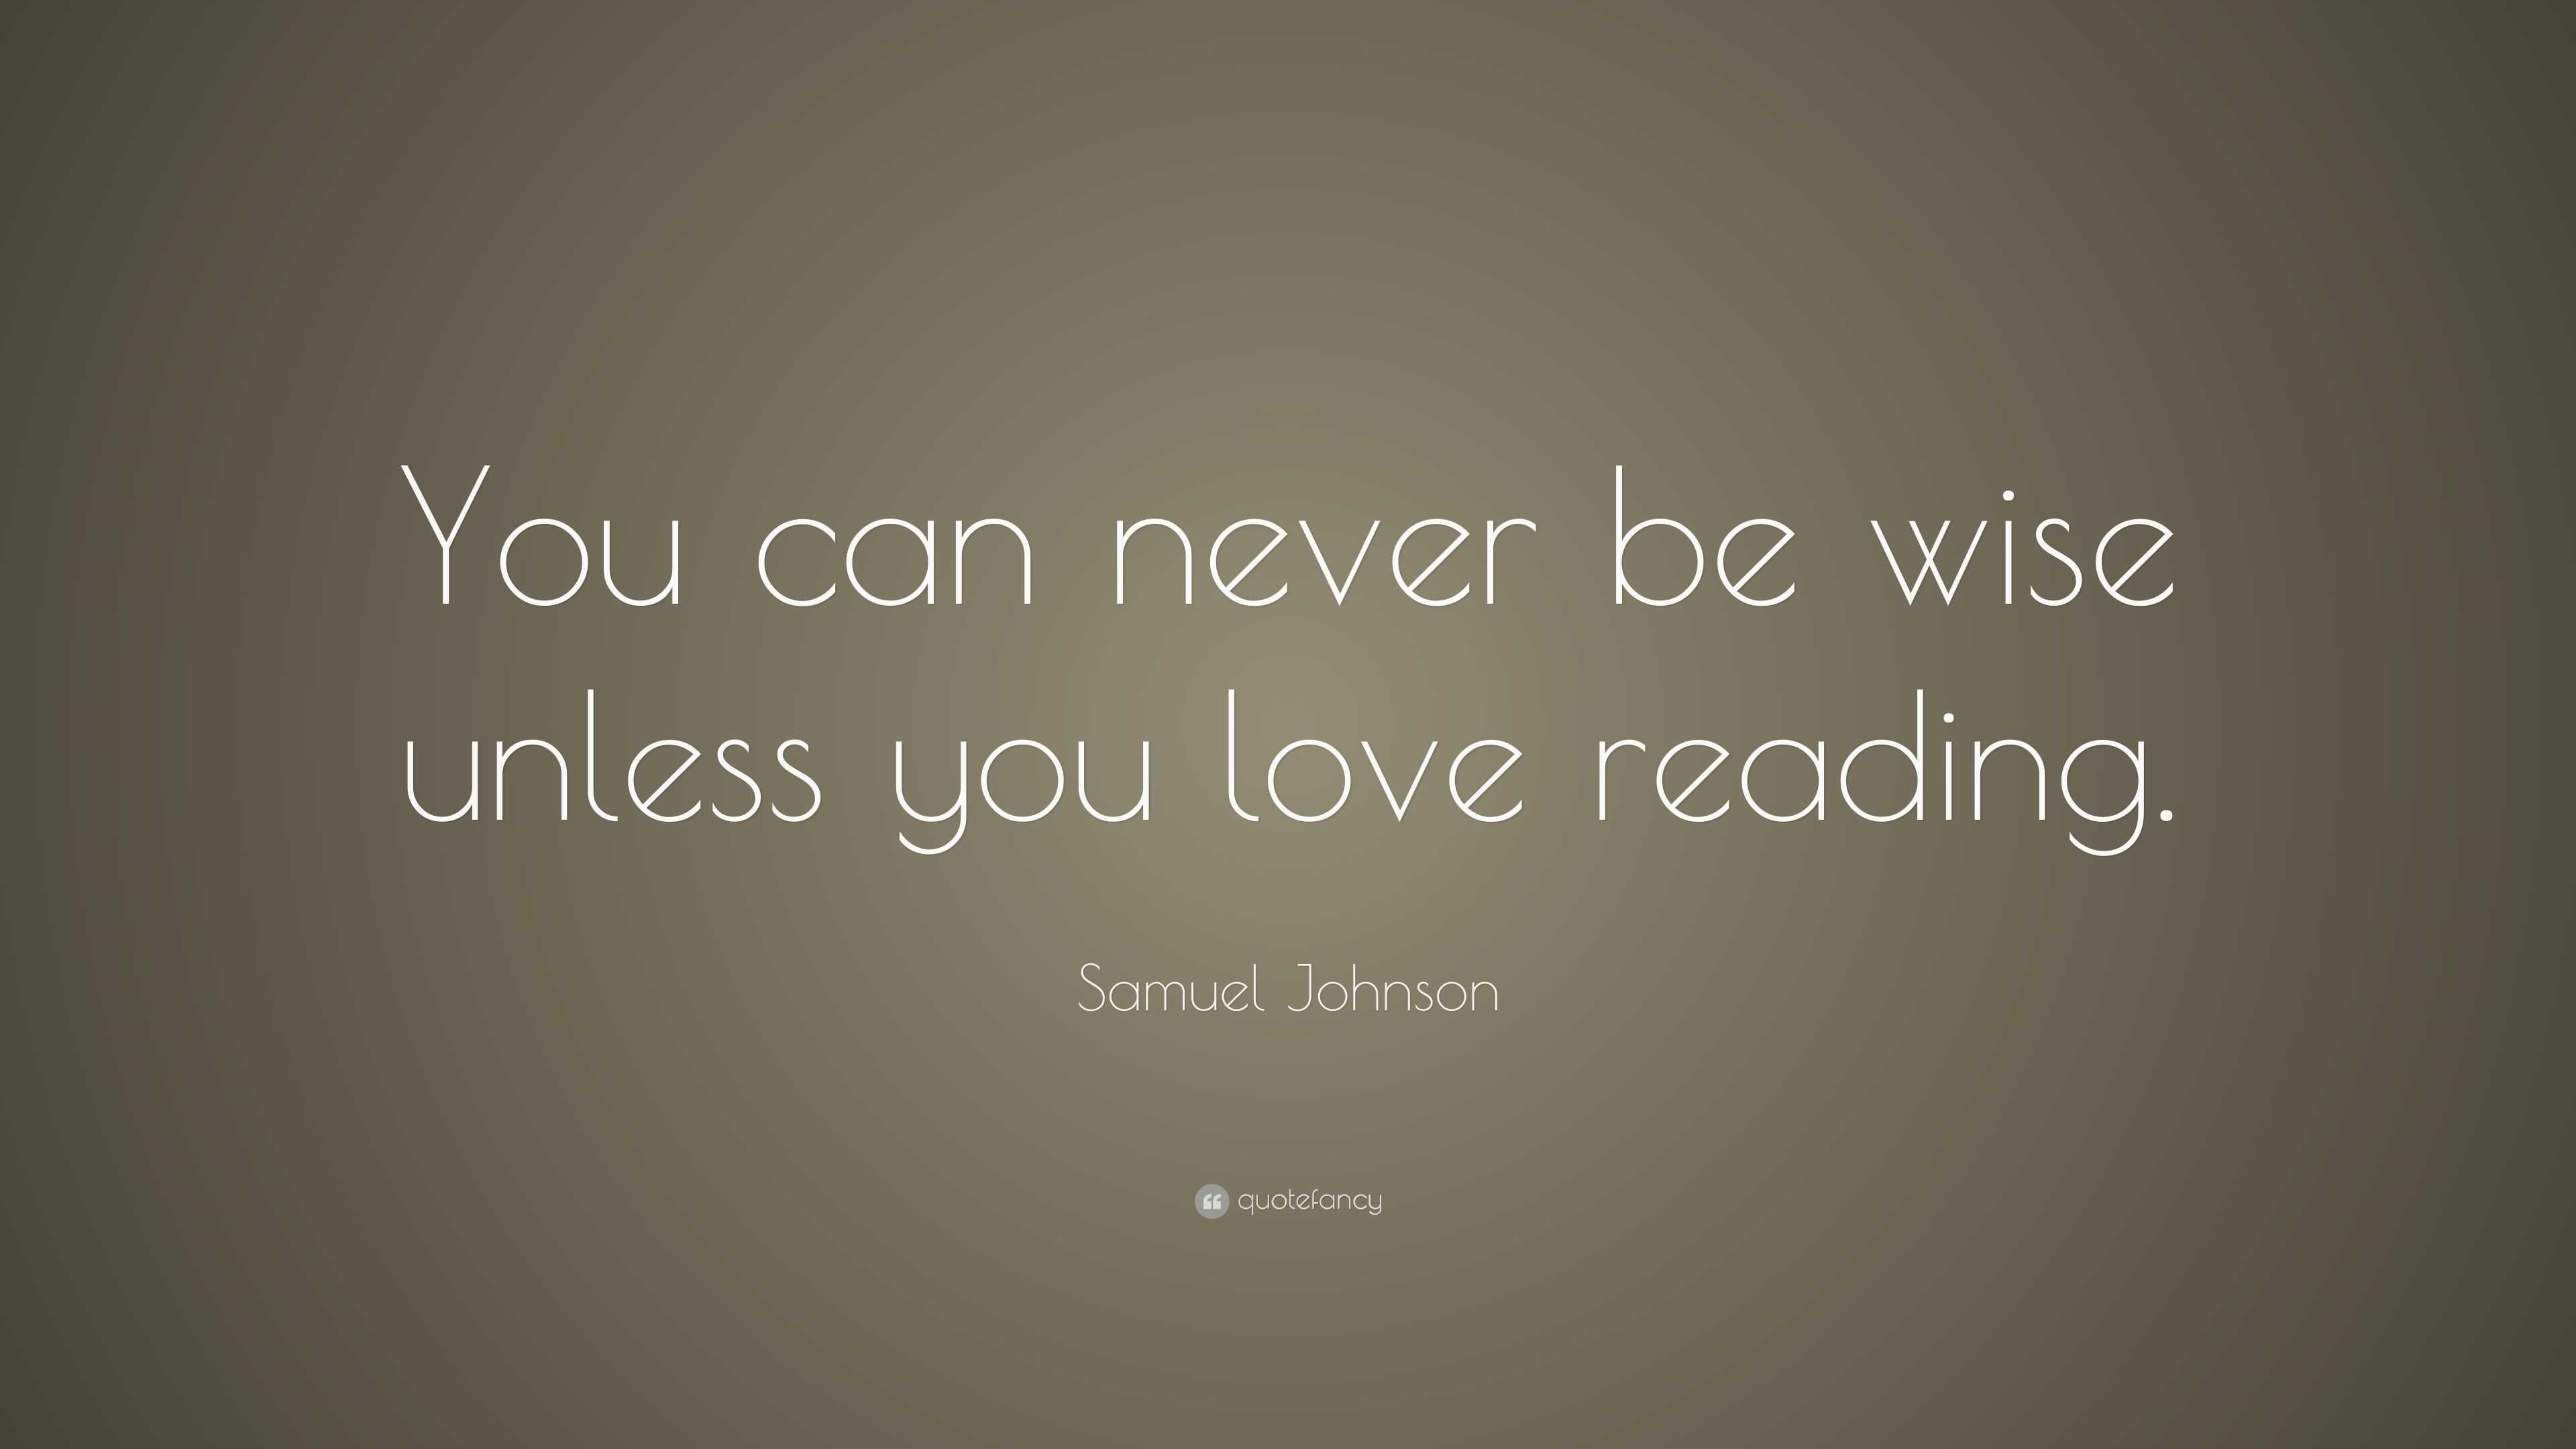 Samuel Johnson Quote “You can never be wise unless you love reading ”